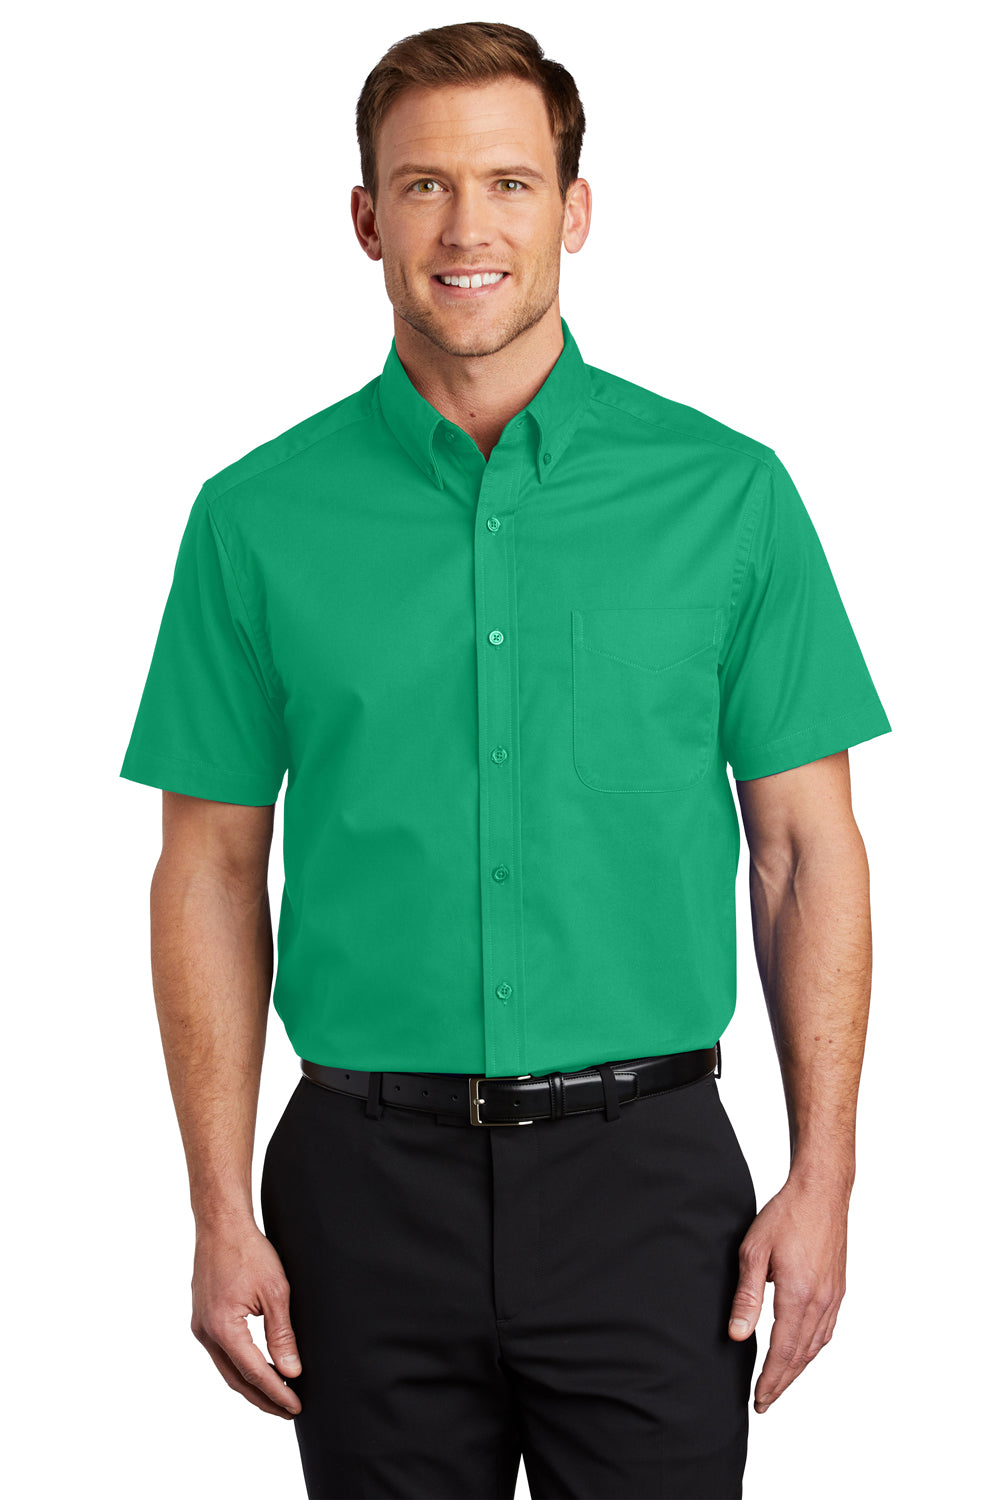 Port Authority S508/TLS508 Mens Easy Care Wrinkle Resistant Short Sleeve Button Down Shirt w/ Pocket Court Green Front